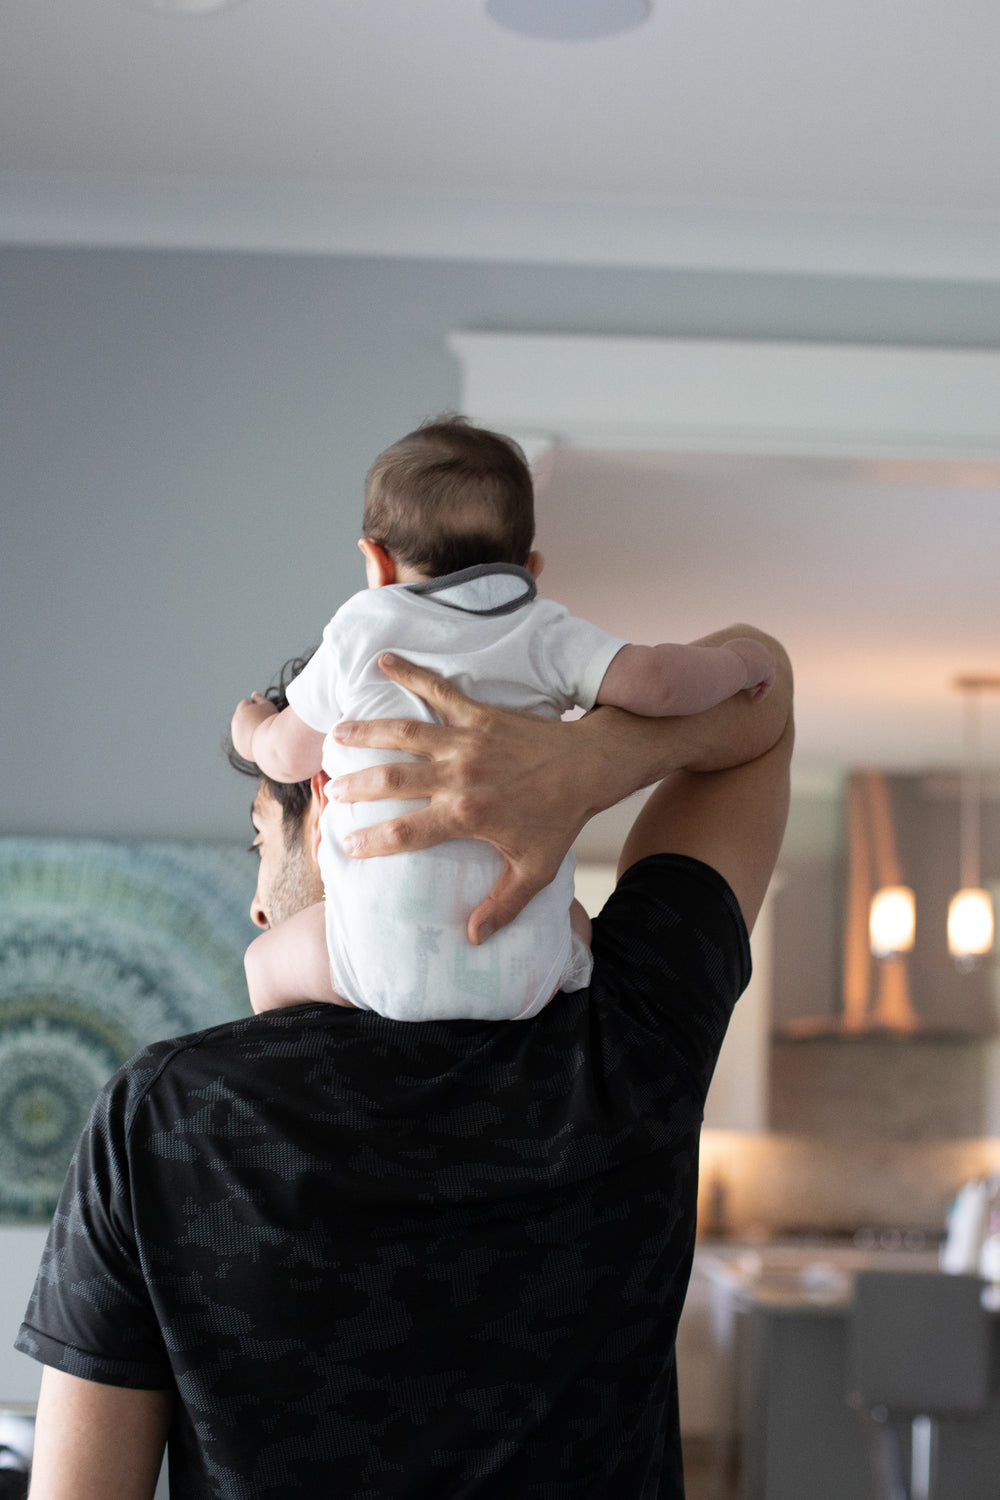 adult faces the wall and holds a baby on shoulders